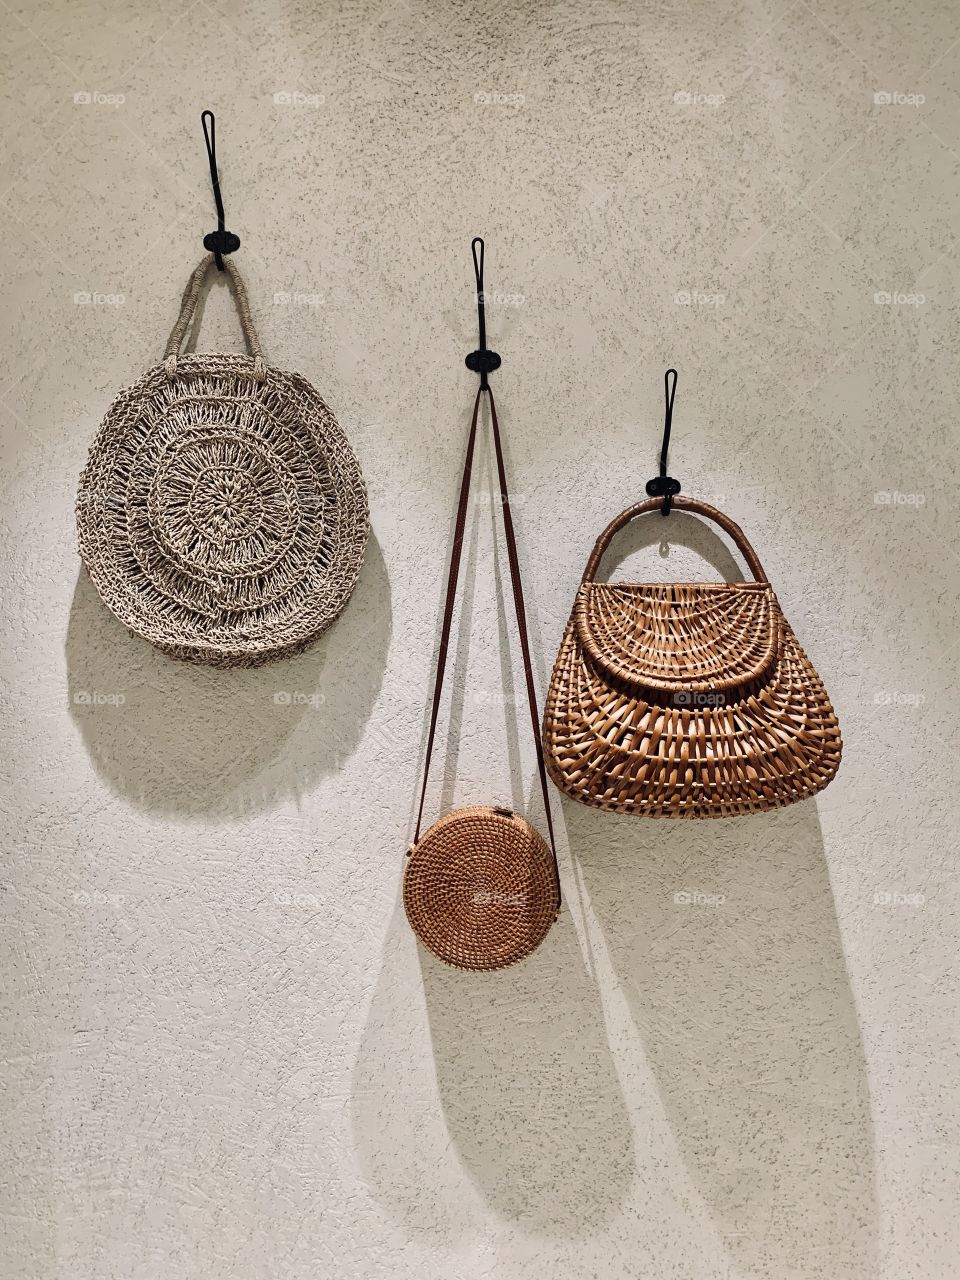 Three hanging wicker bags, fashion accessories concept 